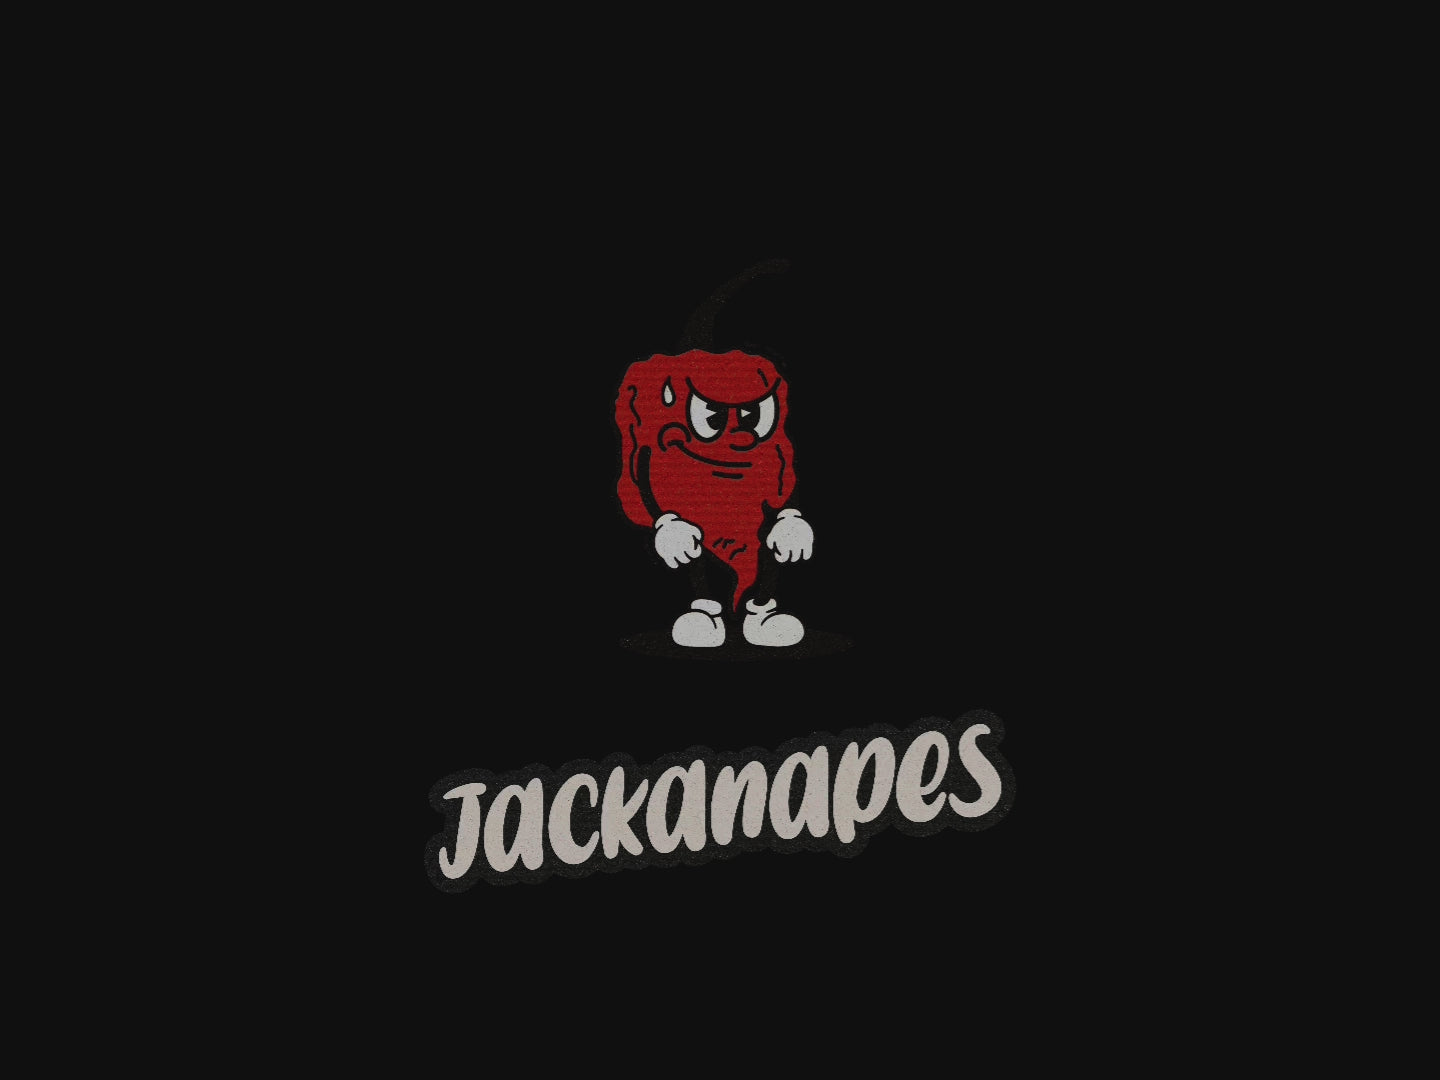 Jackanapes brand video highlighting cooking with hot sauces jams and mayonnaise